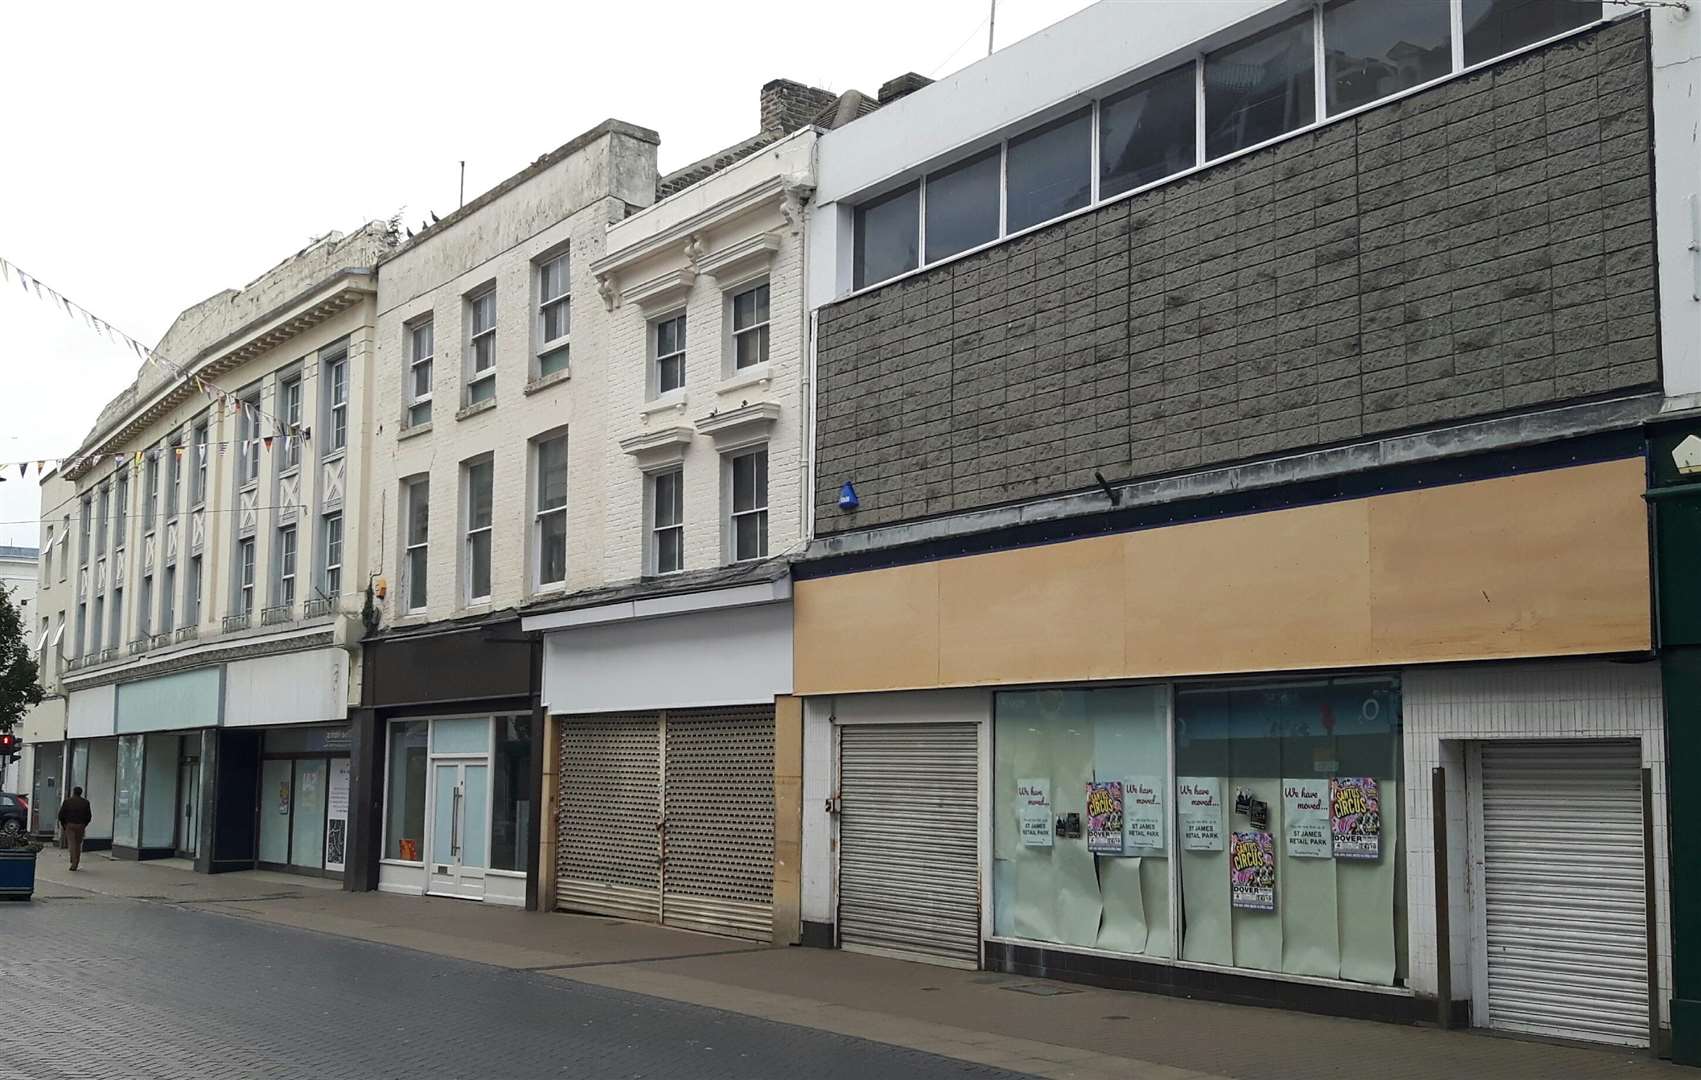 The blight of empty shops at Dover's precinct